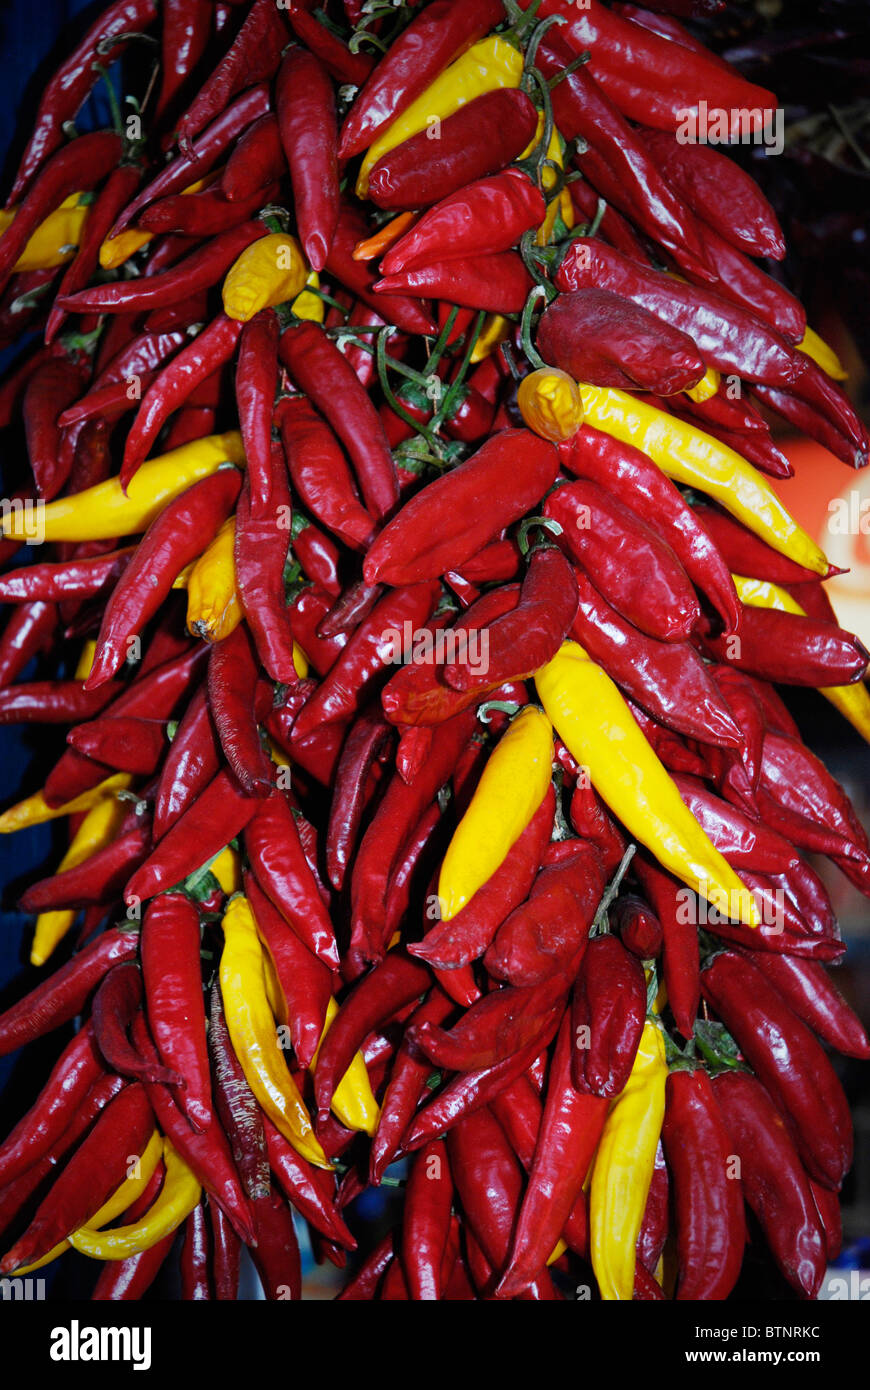 Dried chilis for sale at The Central Market (Nagy vásárcsarnok) in Budapest, Hungary. Stock Photo